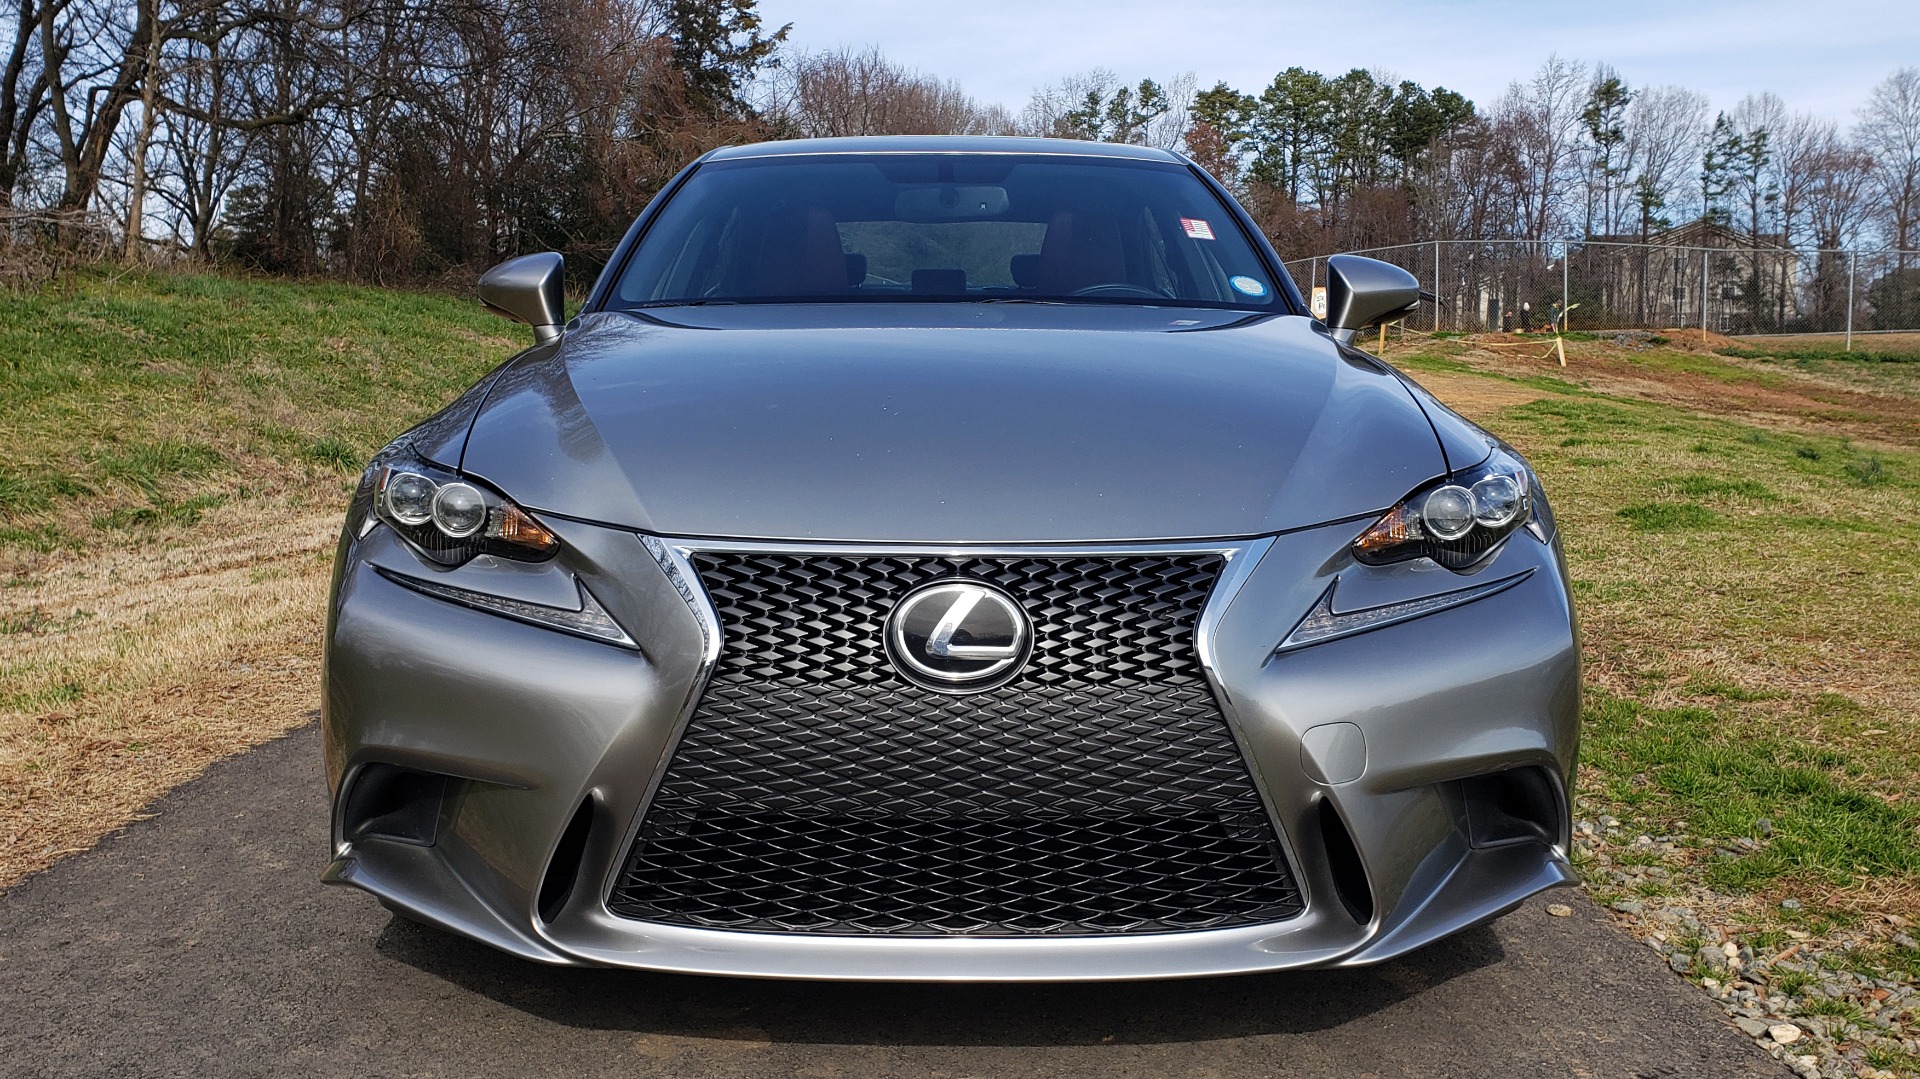 Used 2016 Lexus IS 350 F-SPORT / NAV / SUNROOF / BSM / REARVIEW for sale Sold at Formula Imports in Charlotte NC 28227 9